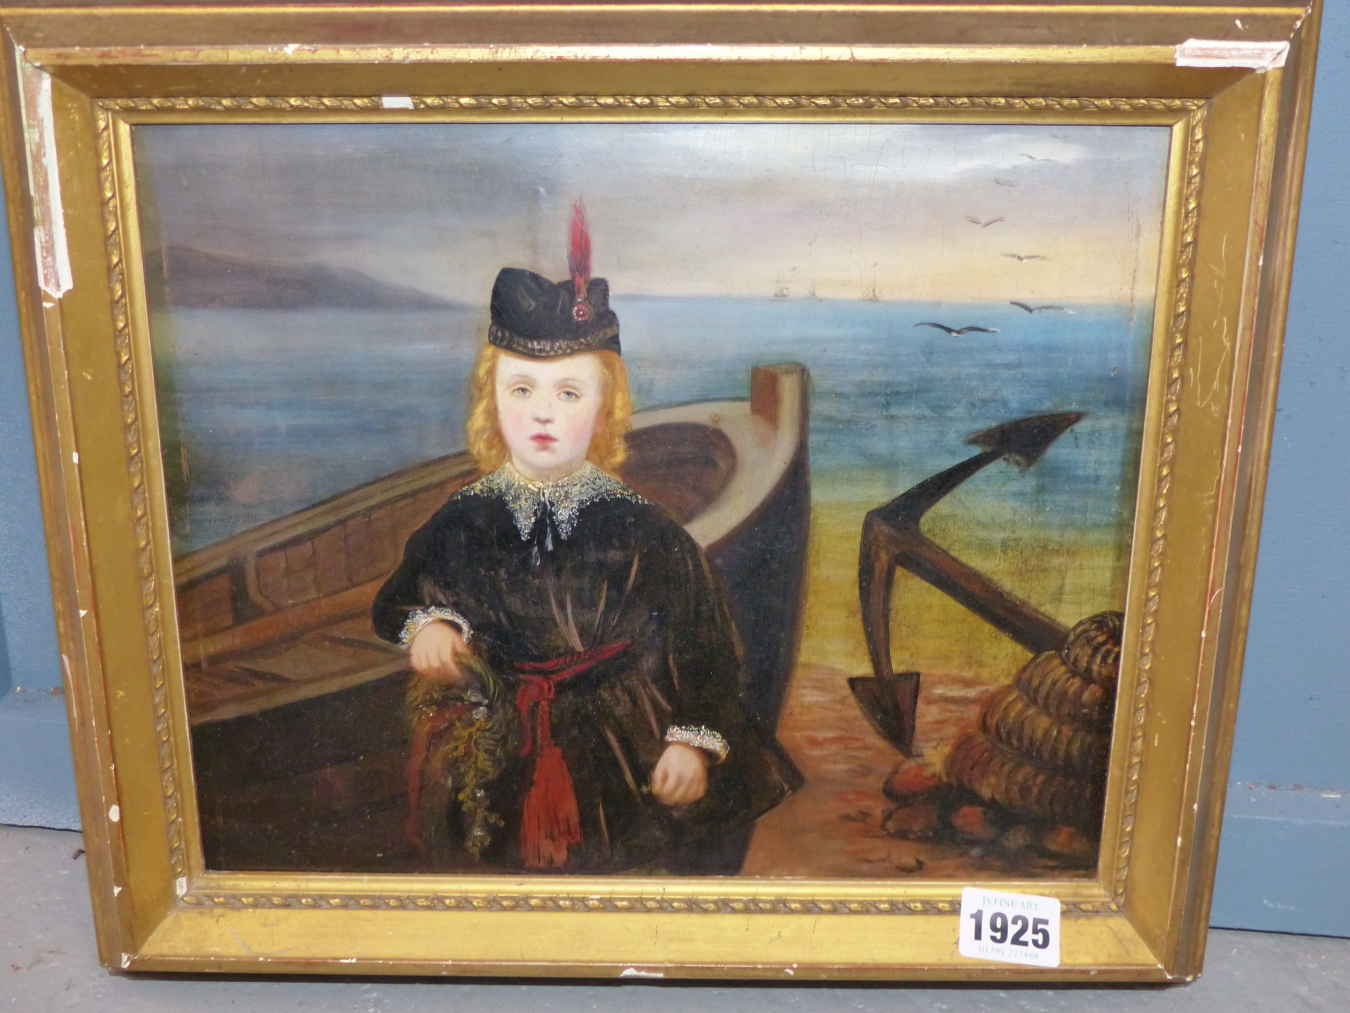 ENGLISH SCHOOL, 19THC. VICTORIAN LAD IN A NAUTICAL SETTING. UNSIGNED, PROVENANCE VERSO "PROPERTY - Image 2 of 4